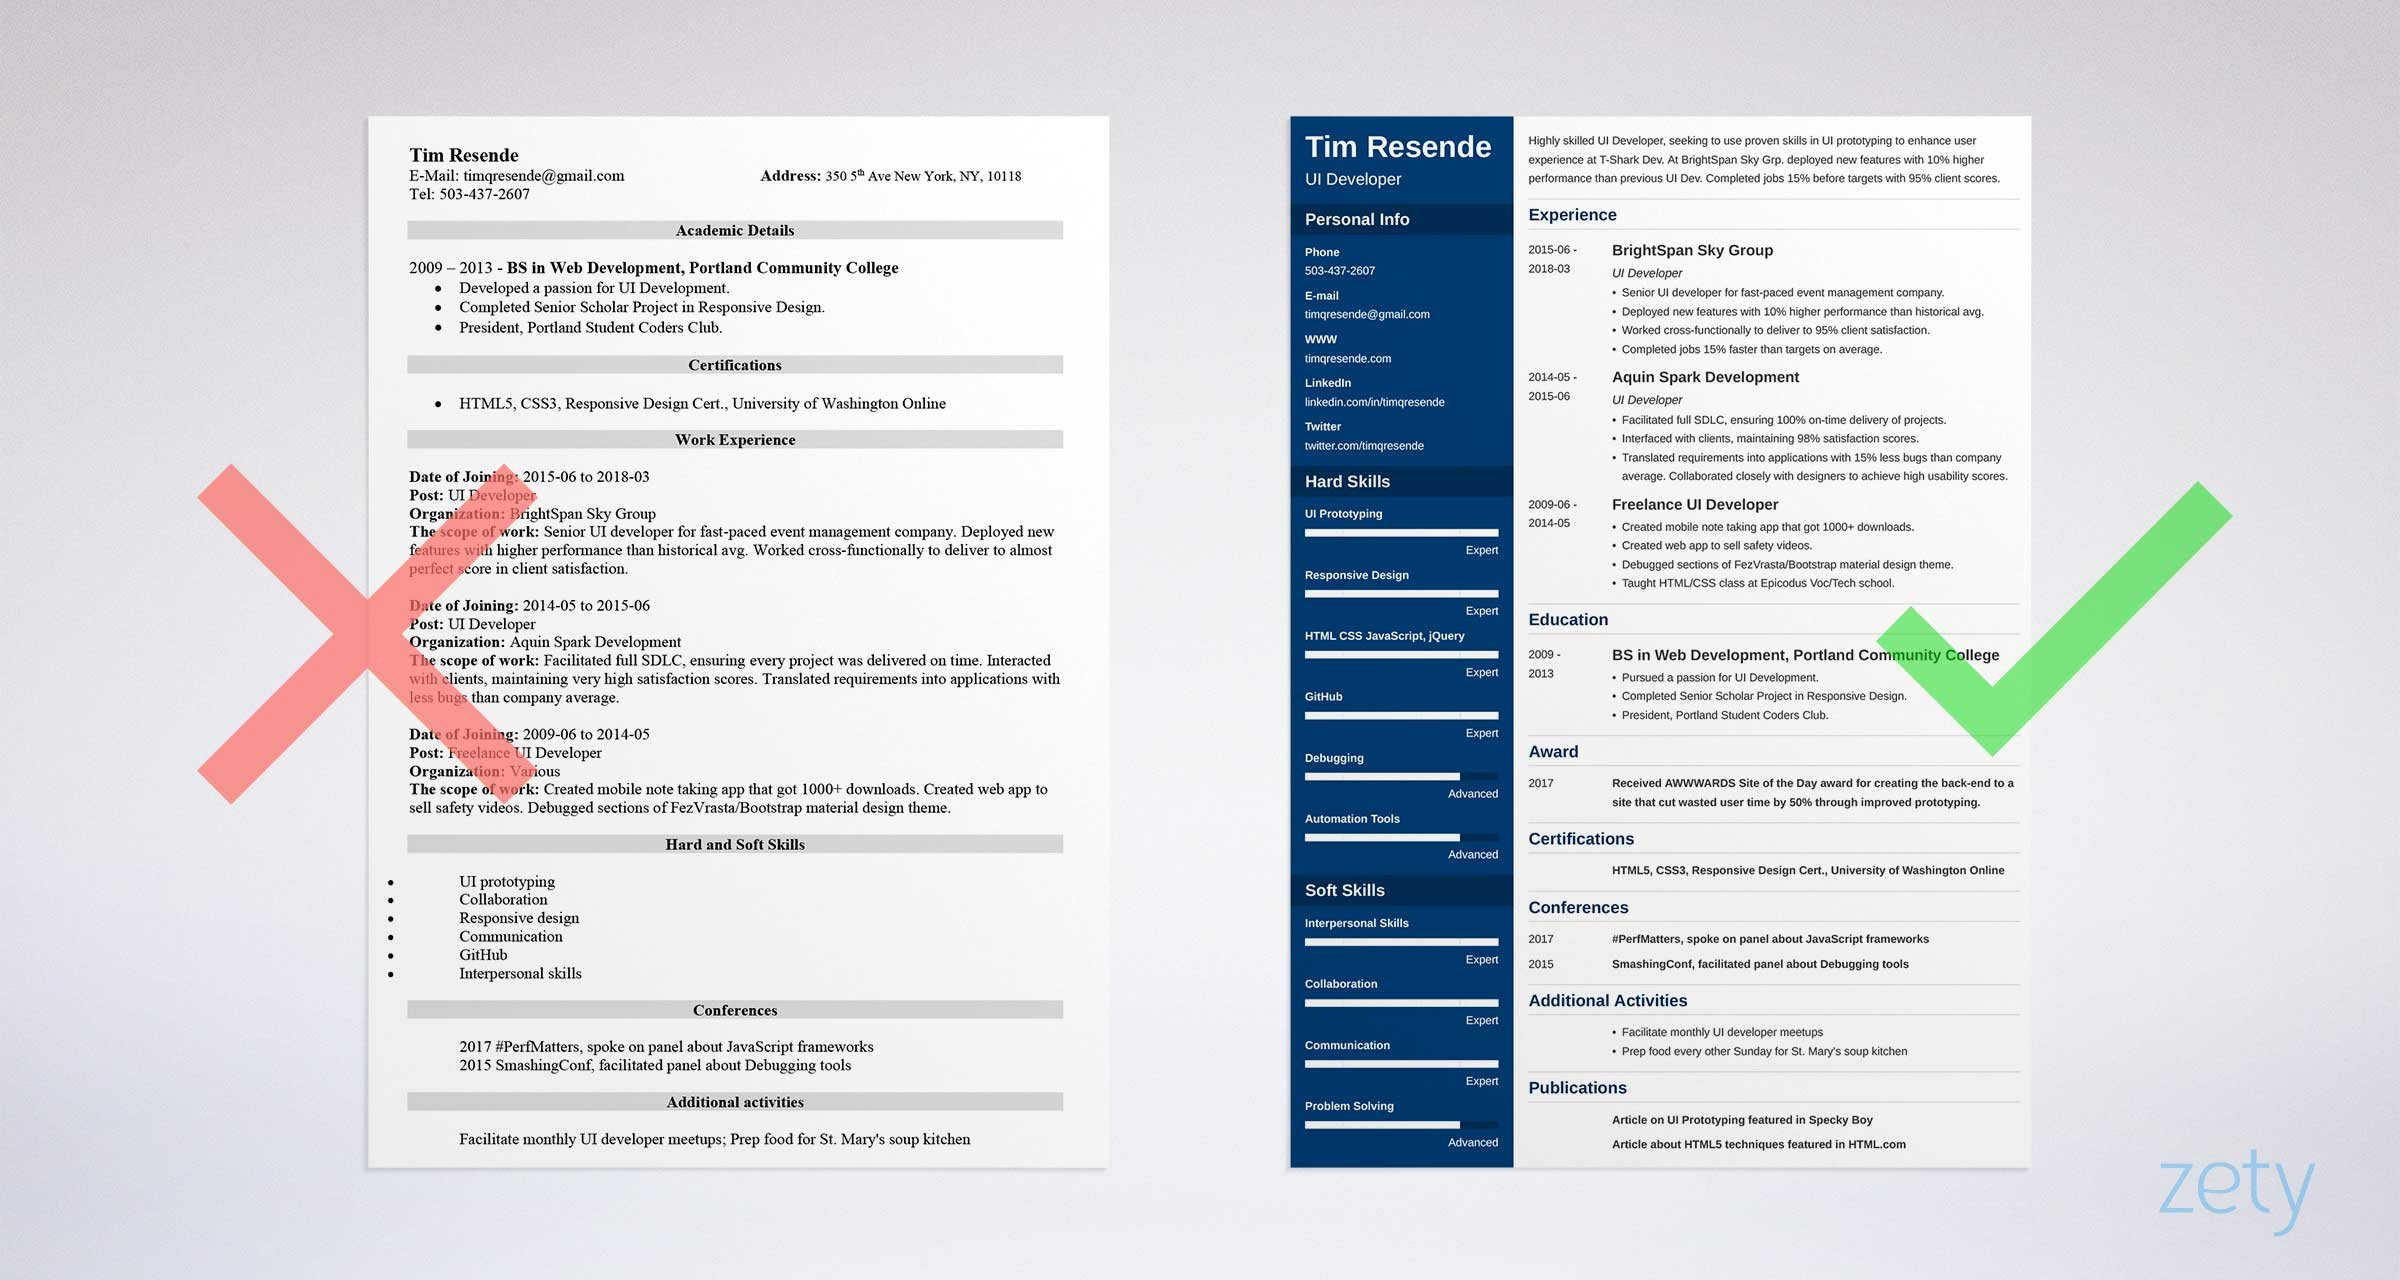 Sample Resume for Ui Developers with 1 Year Experience 4lancarrezekiq Ui/ux Resume Samples (guide with Templates & Skills)